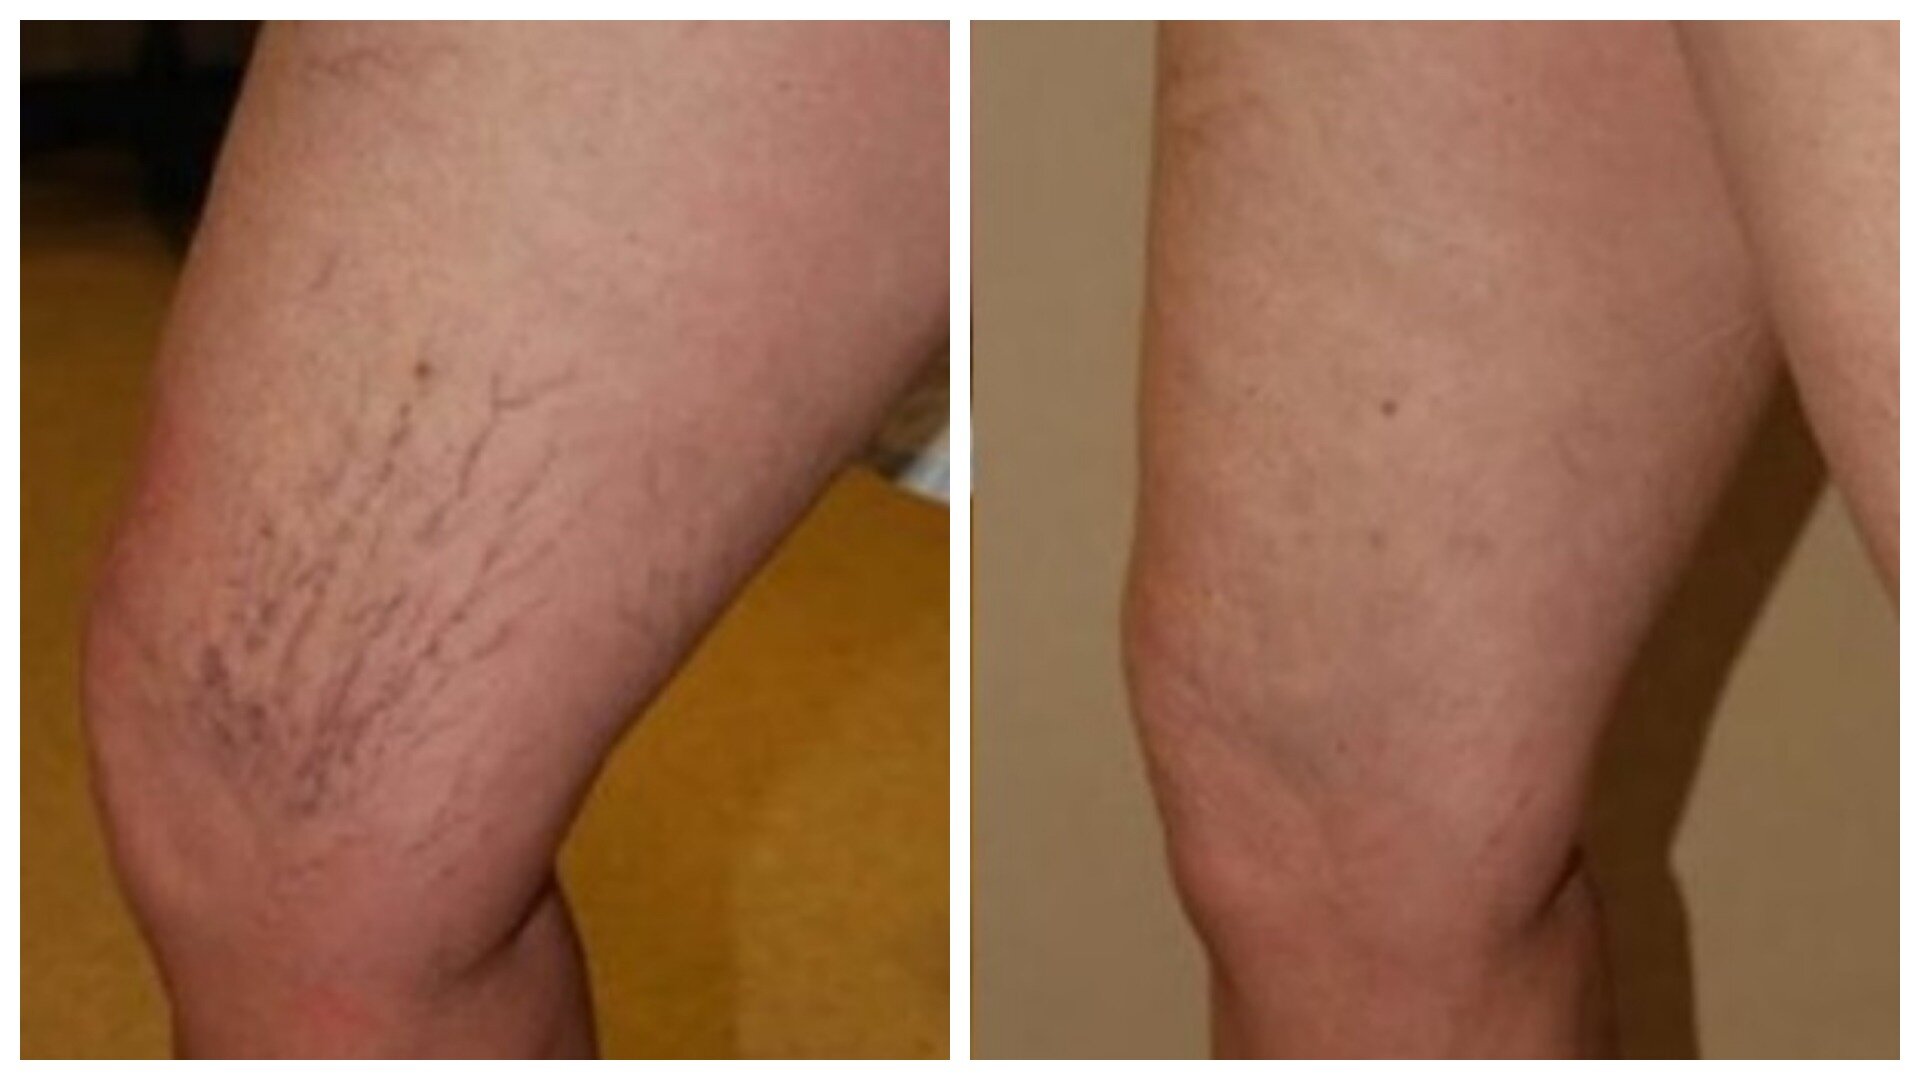 Spider vein removal from legs